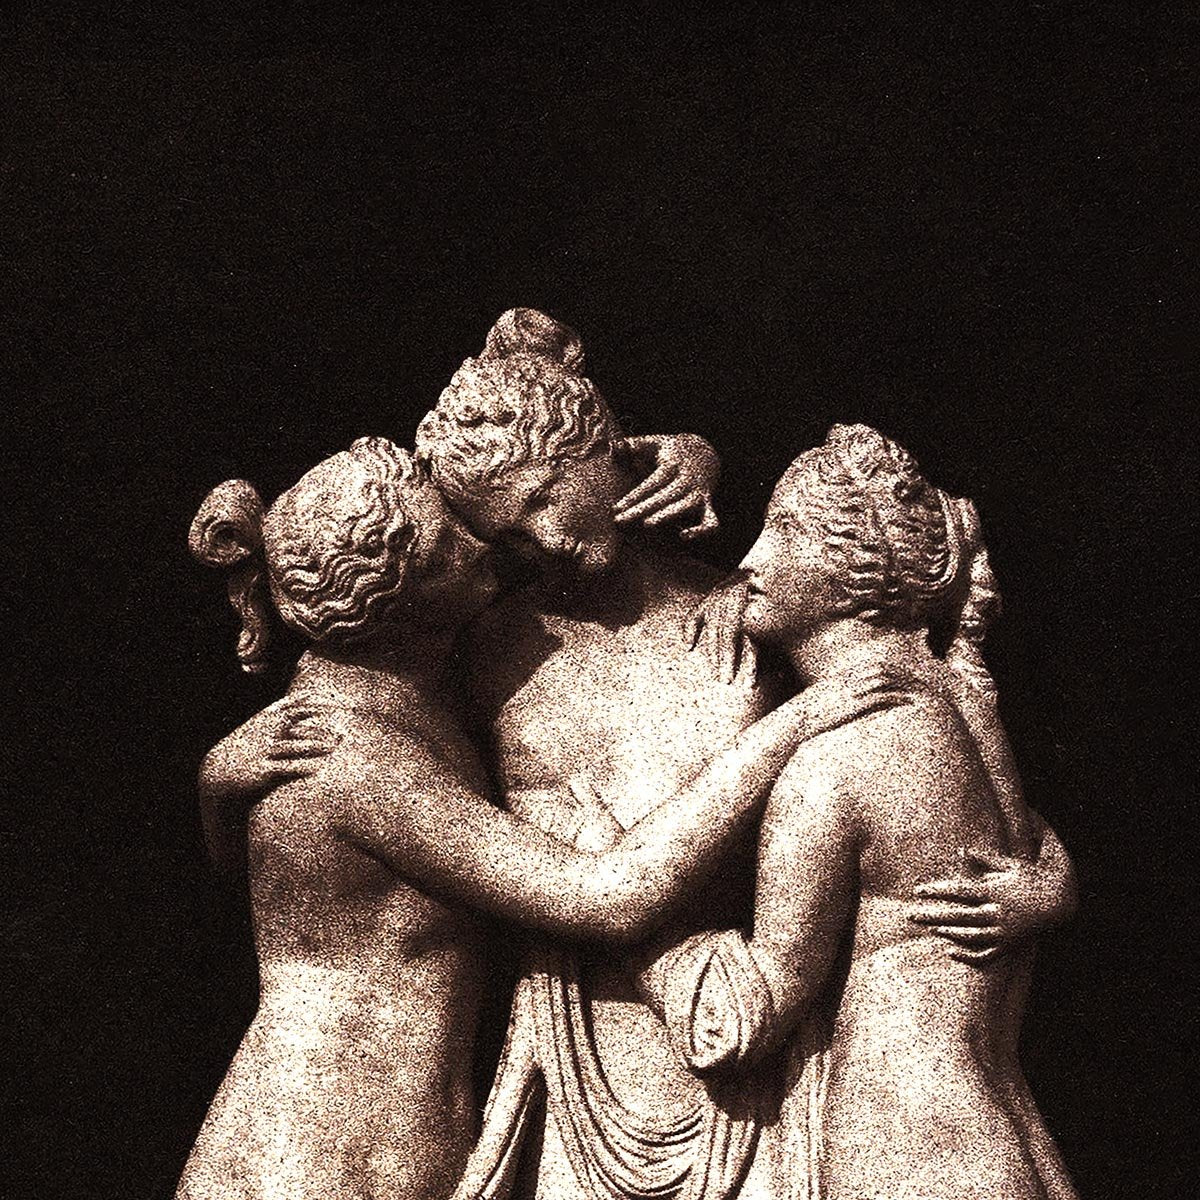 Three Graces by William Henry Fox Talbot